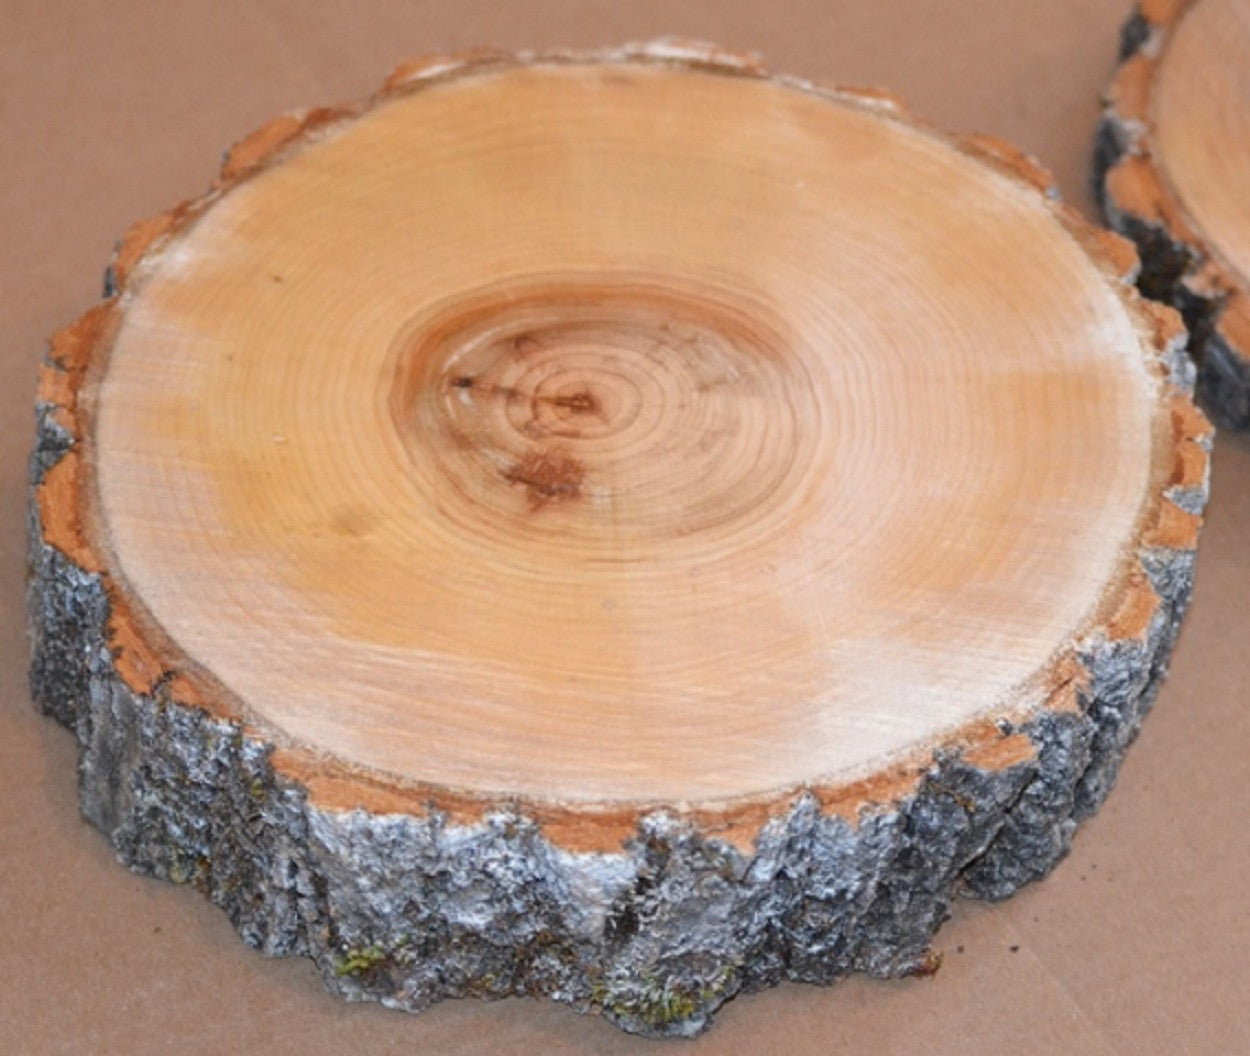 Aspen Wood Slices 10 1/2" to 12" diameter x 1" thick Package of 10. Wholesale